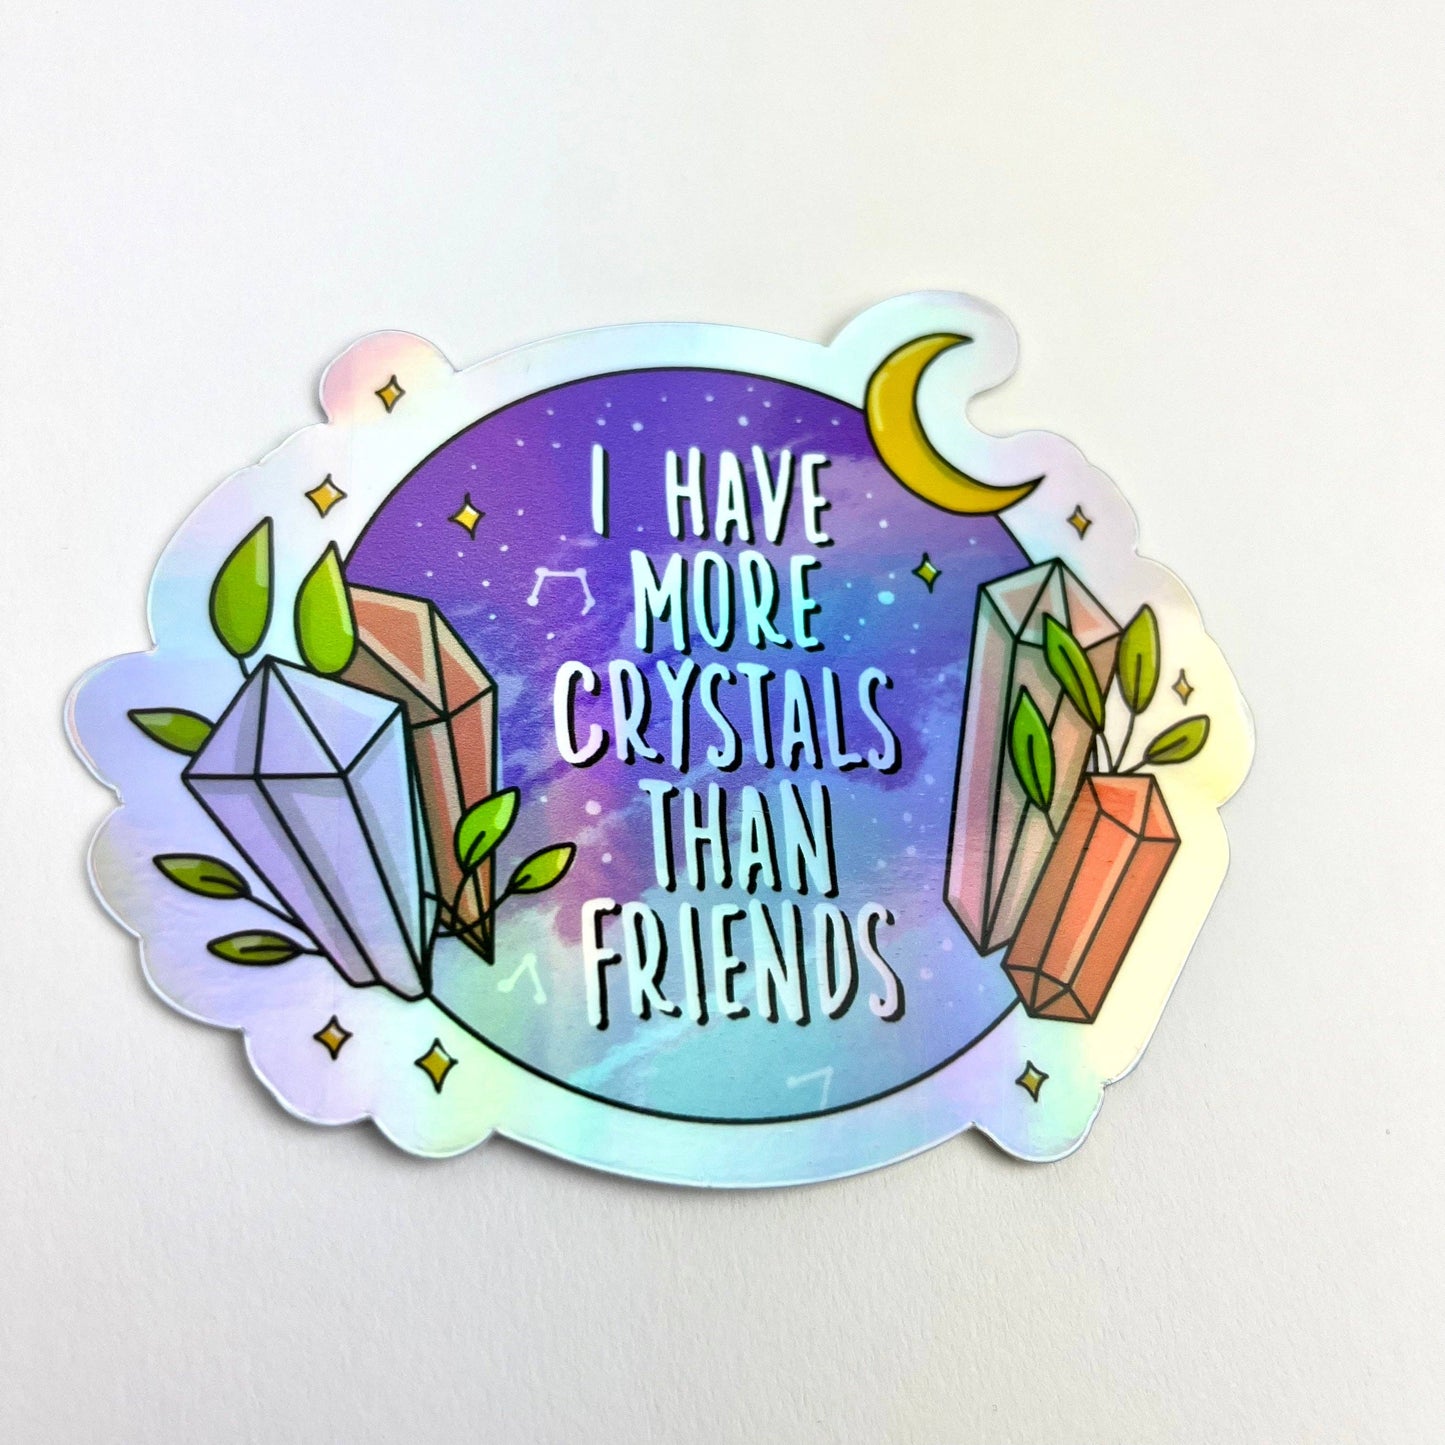 More Crystals Than Friends - Holographic